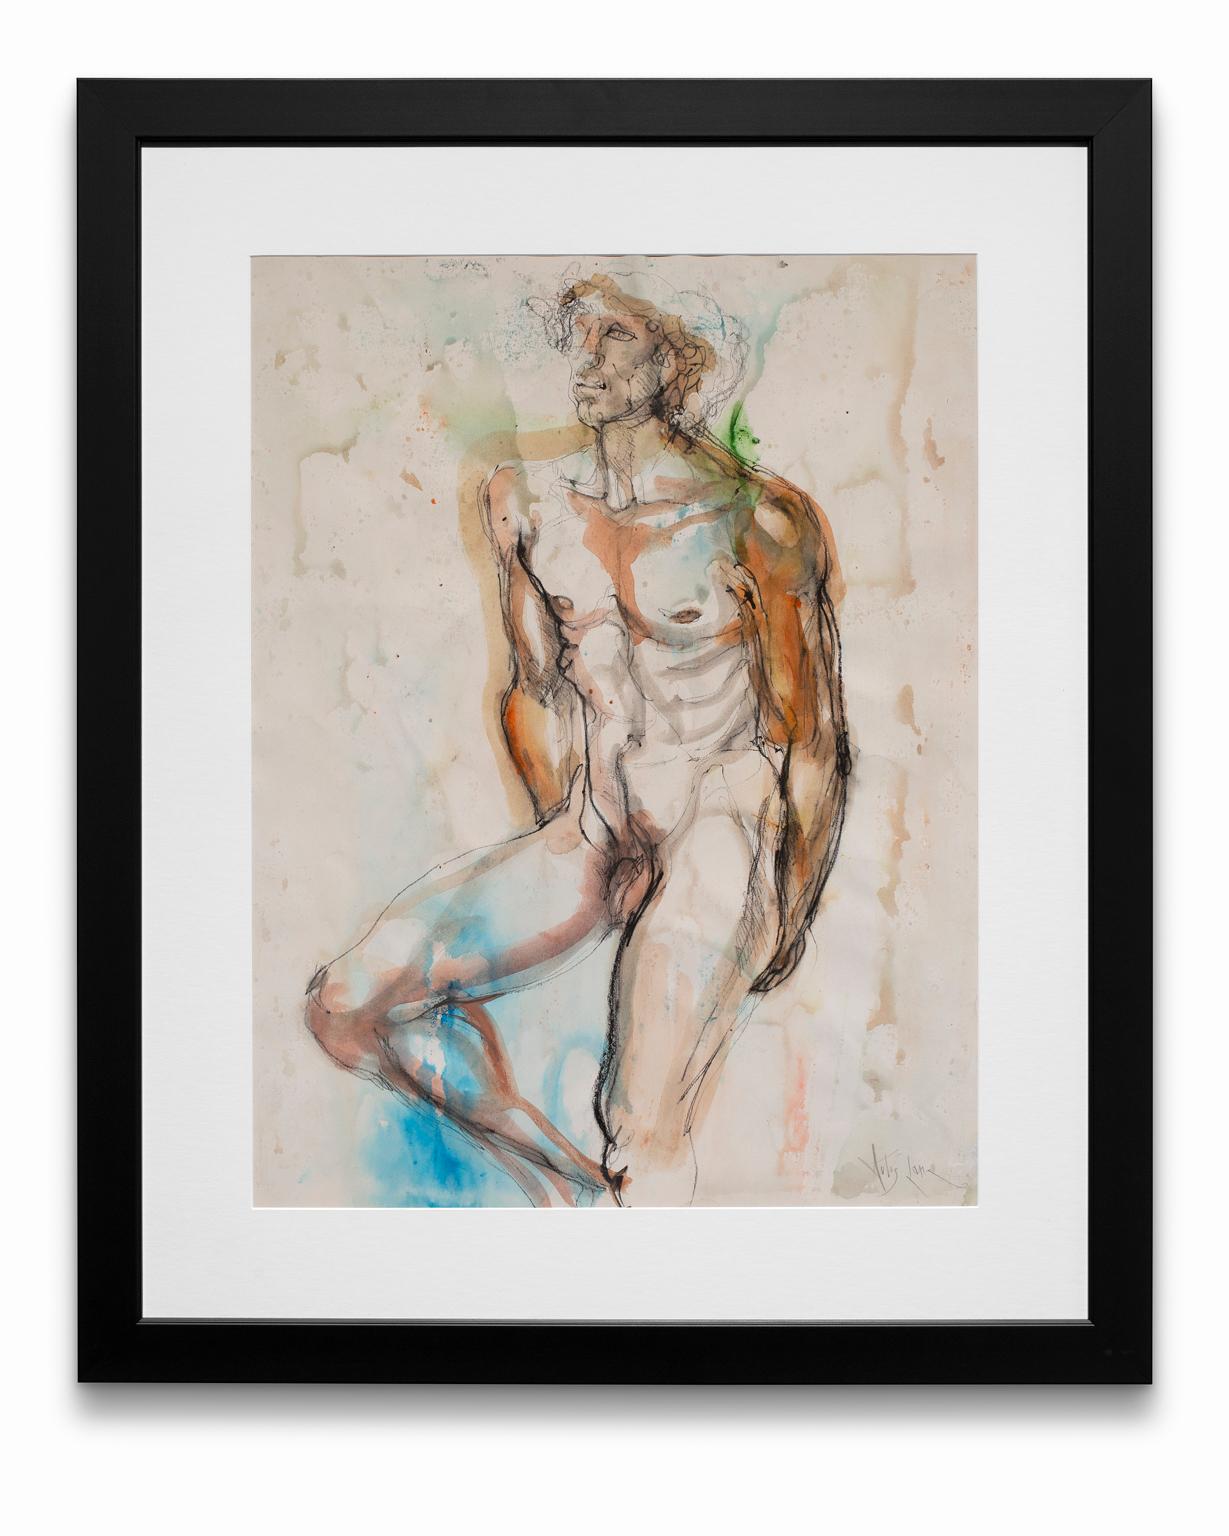 Artis Lane Nude Painting - "Nude Male #2", Watercolor and Charcoal on Paper